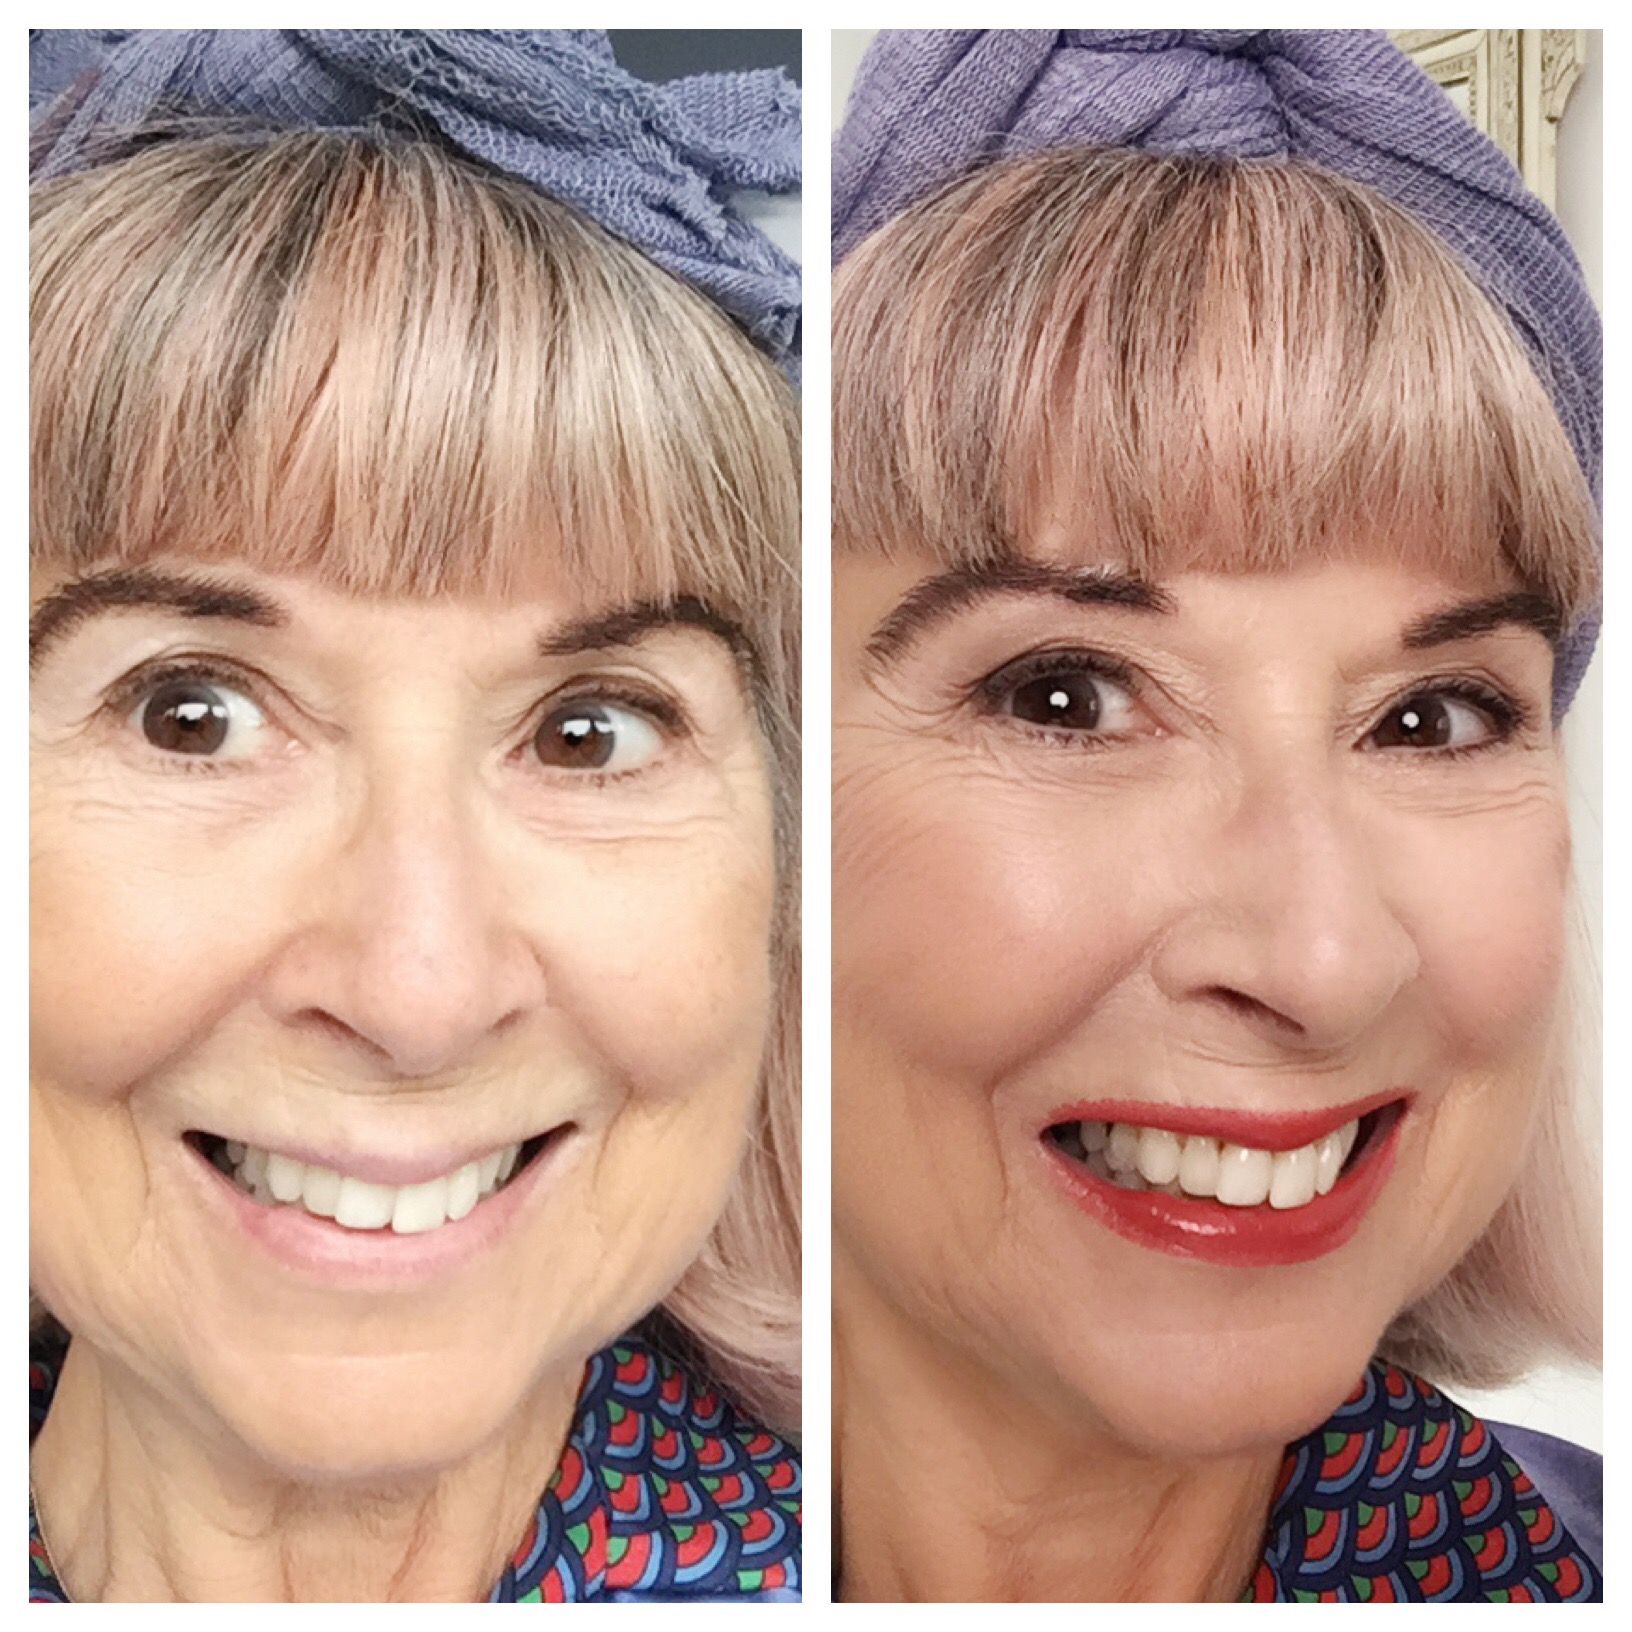 I get a makeover & new makeup for the Over 50s. — Alternative Ageing